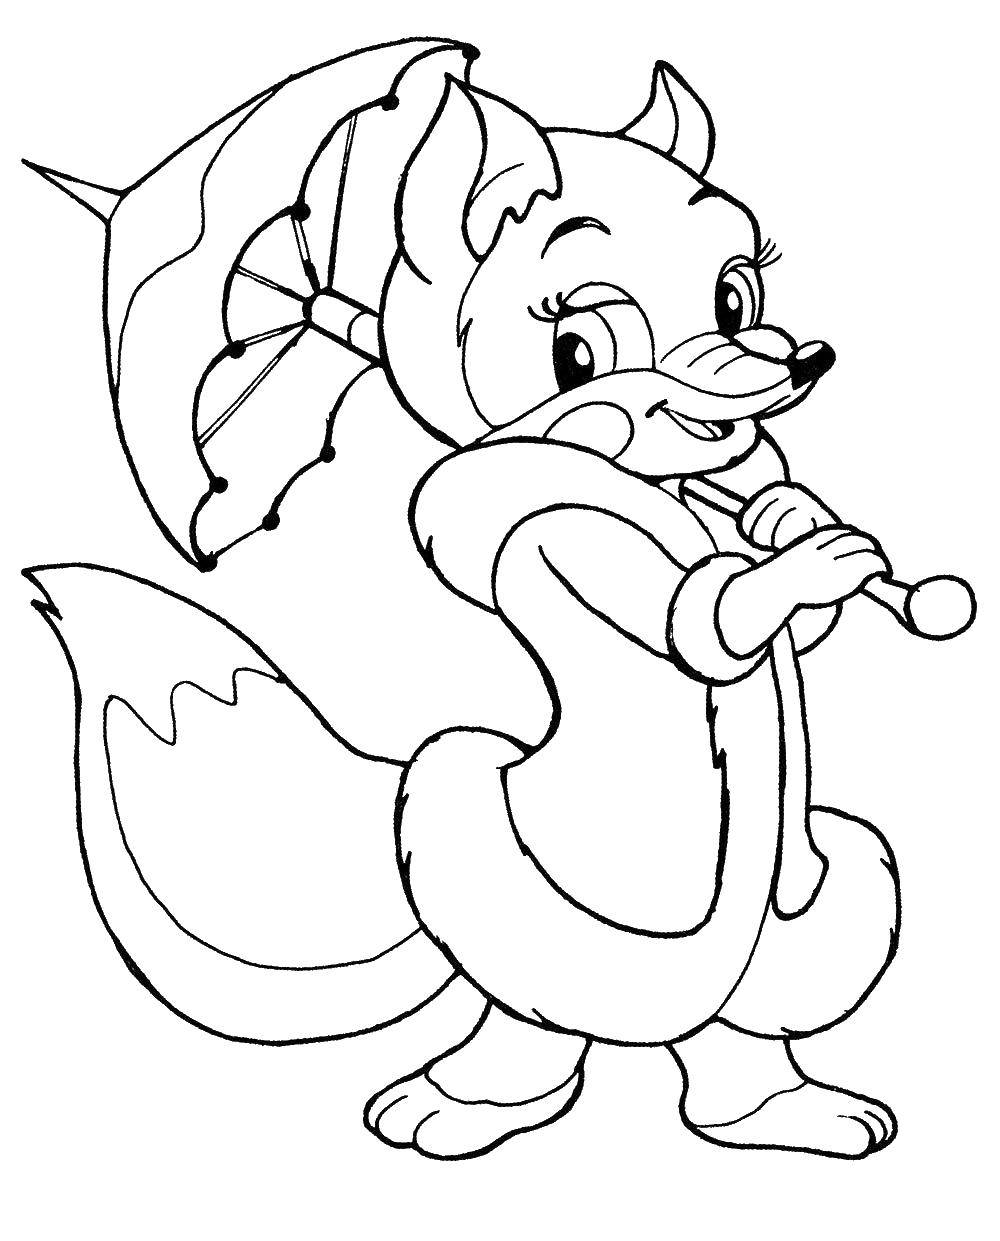 Coloring Fox with umbrella. Category the Fox. Tags:  chanterelle, parasol.